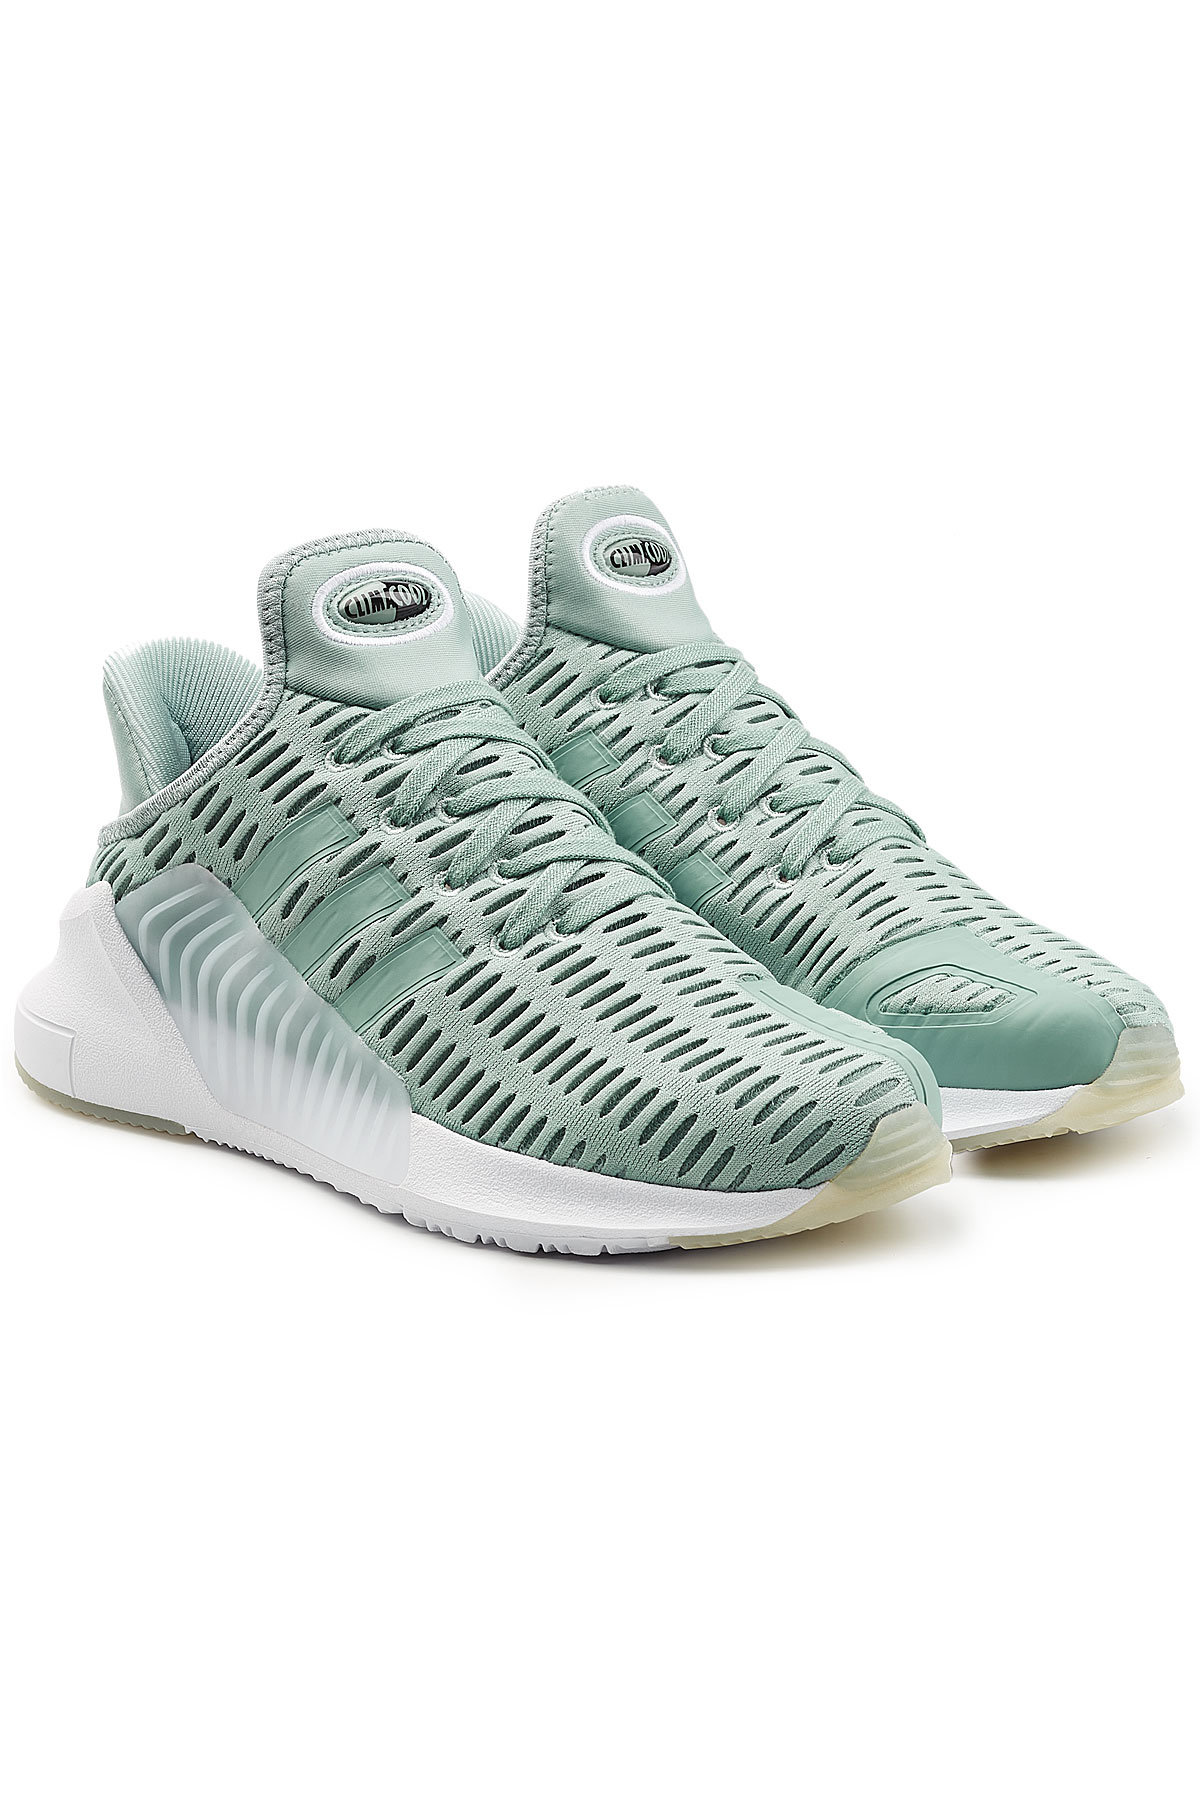 Adidas Originals - Climacool 02/17 Sneakers with Mesh